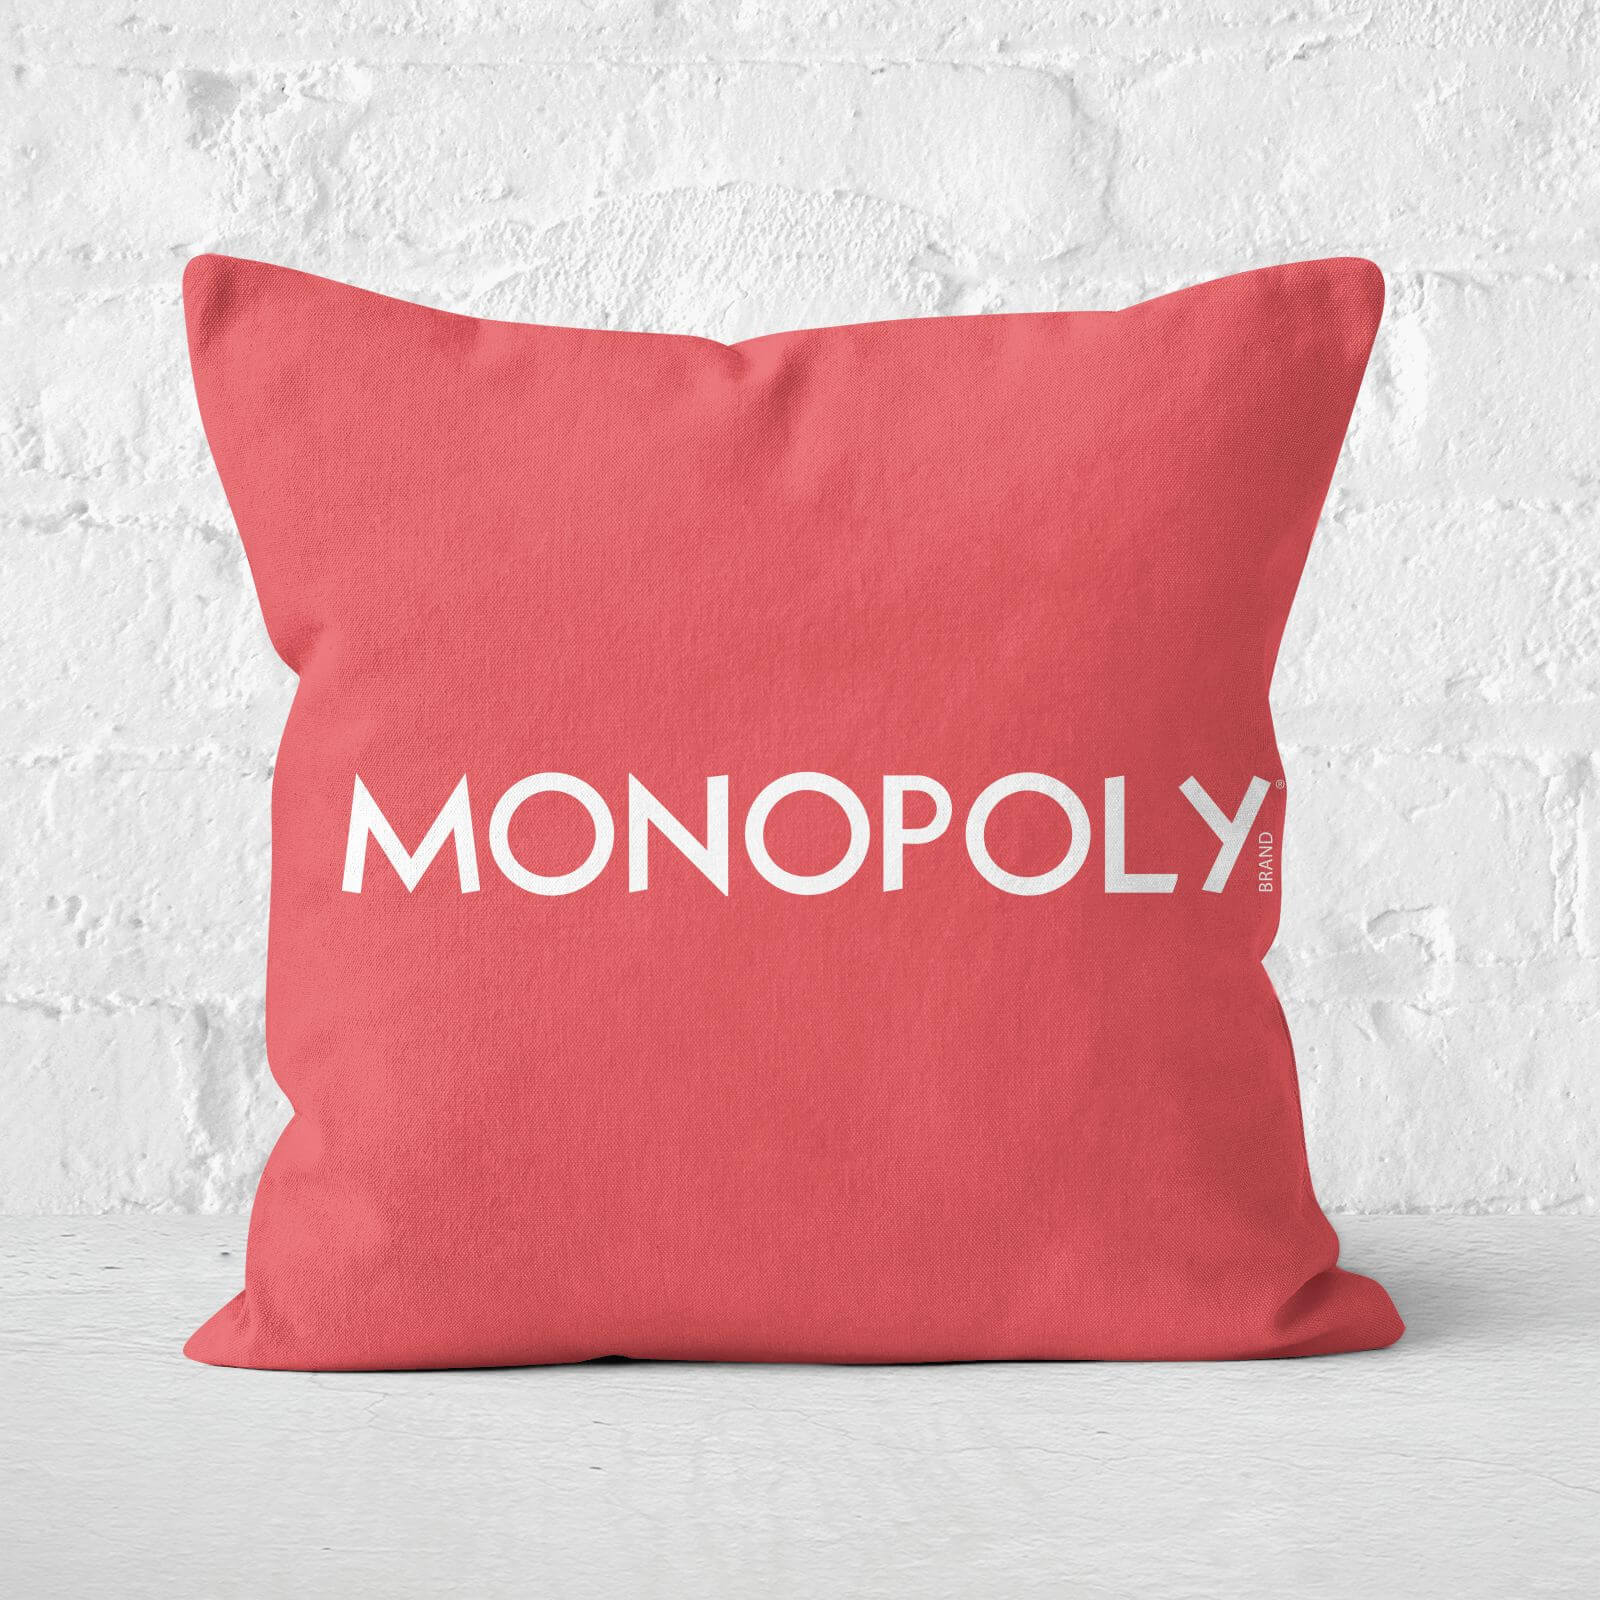 Monopoly Pattern Square Cushion - 60x60cm - Soft Touch